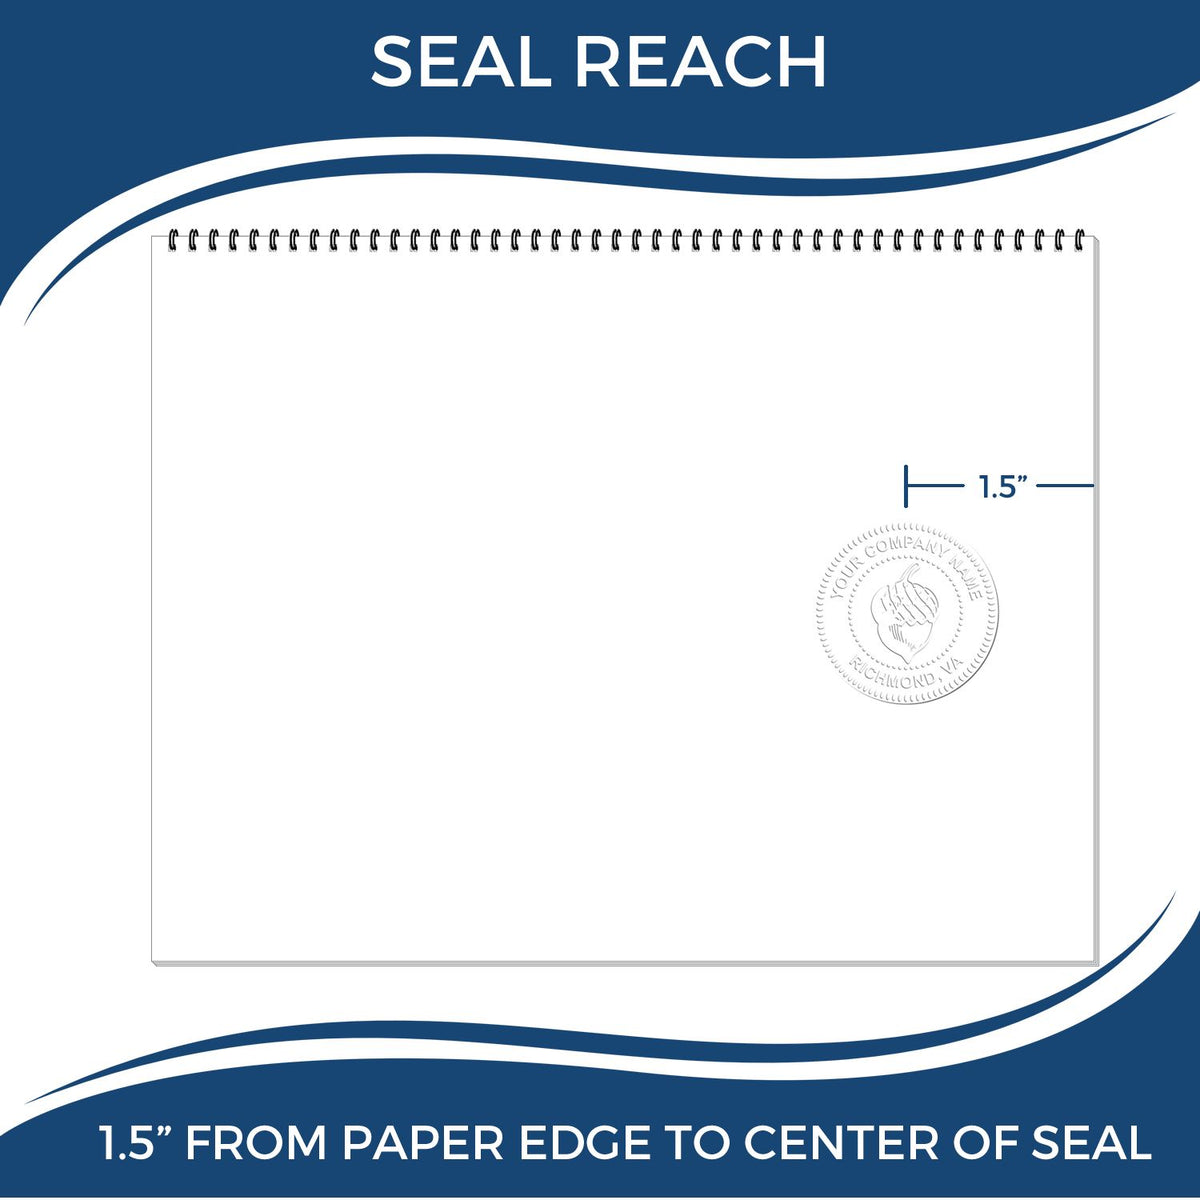 An infographic showing the seal reach which is represented by a ruler and a miniature seal image of the Hybrid Virginia Land Surveyor Seal